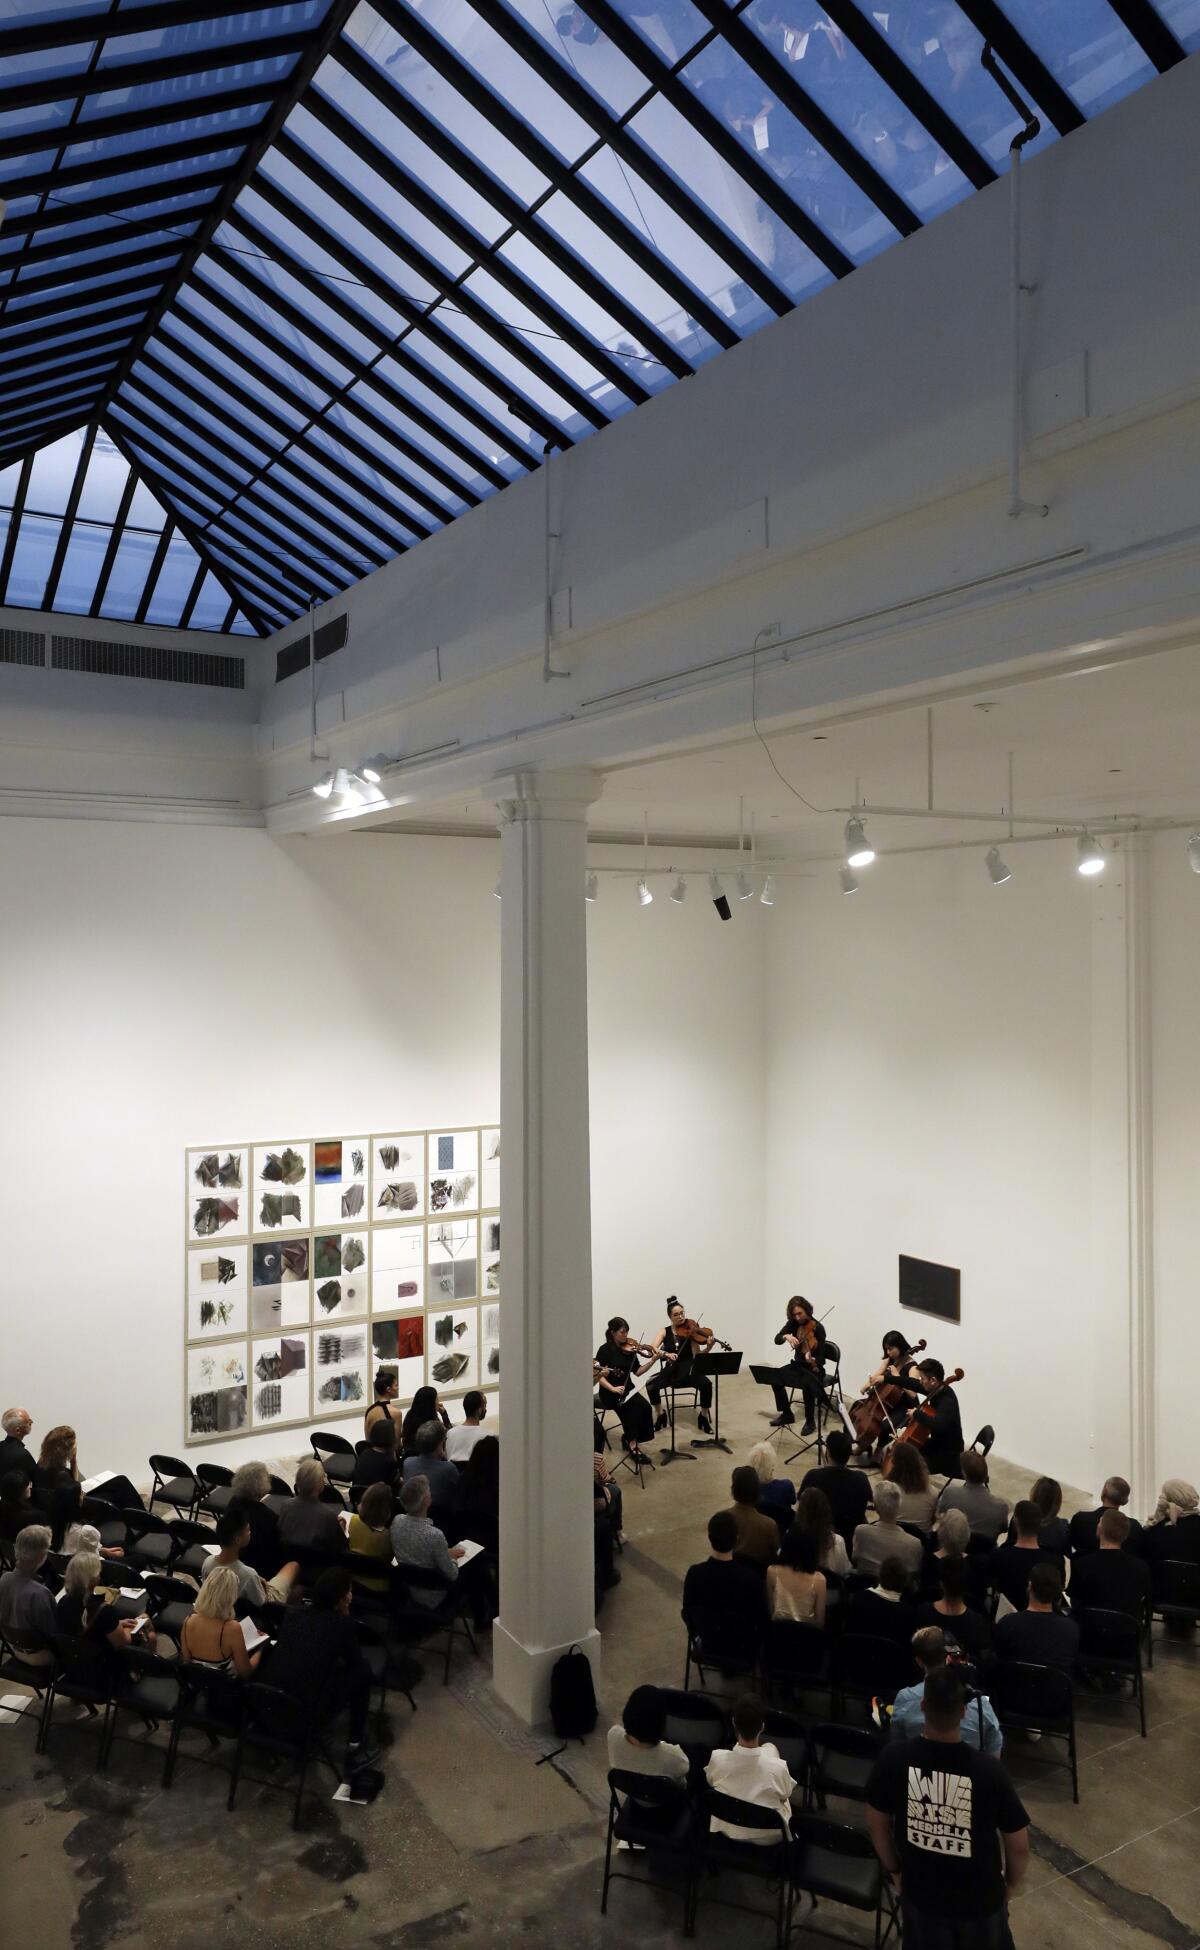 Monday Evening Concerts at art gallery Hauser & Wirth.